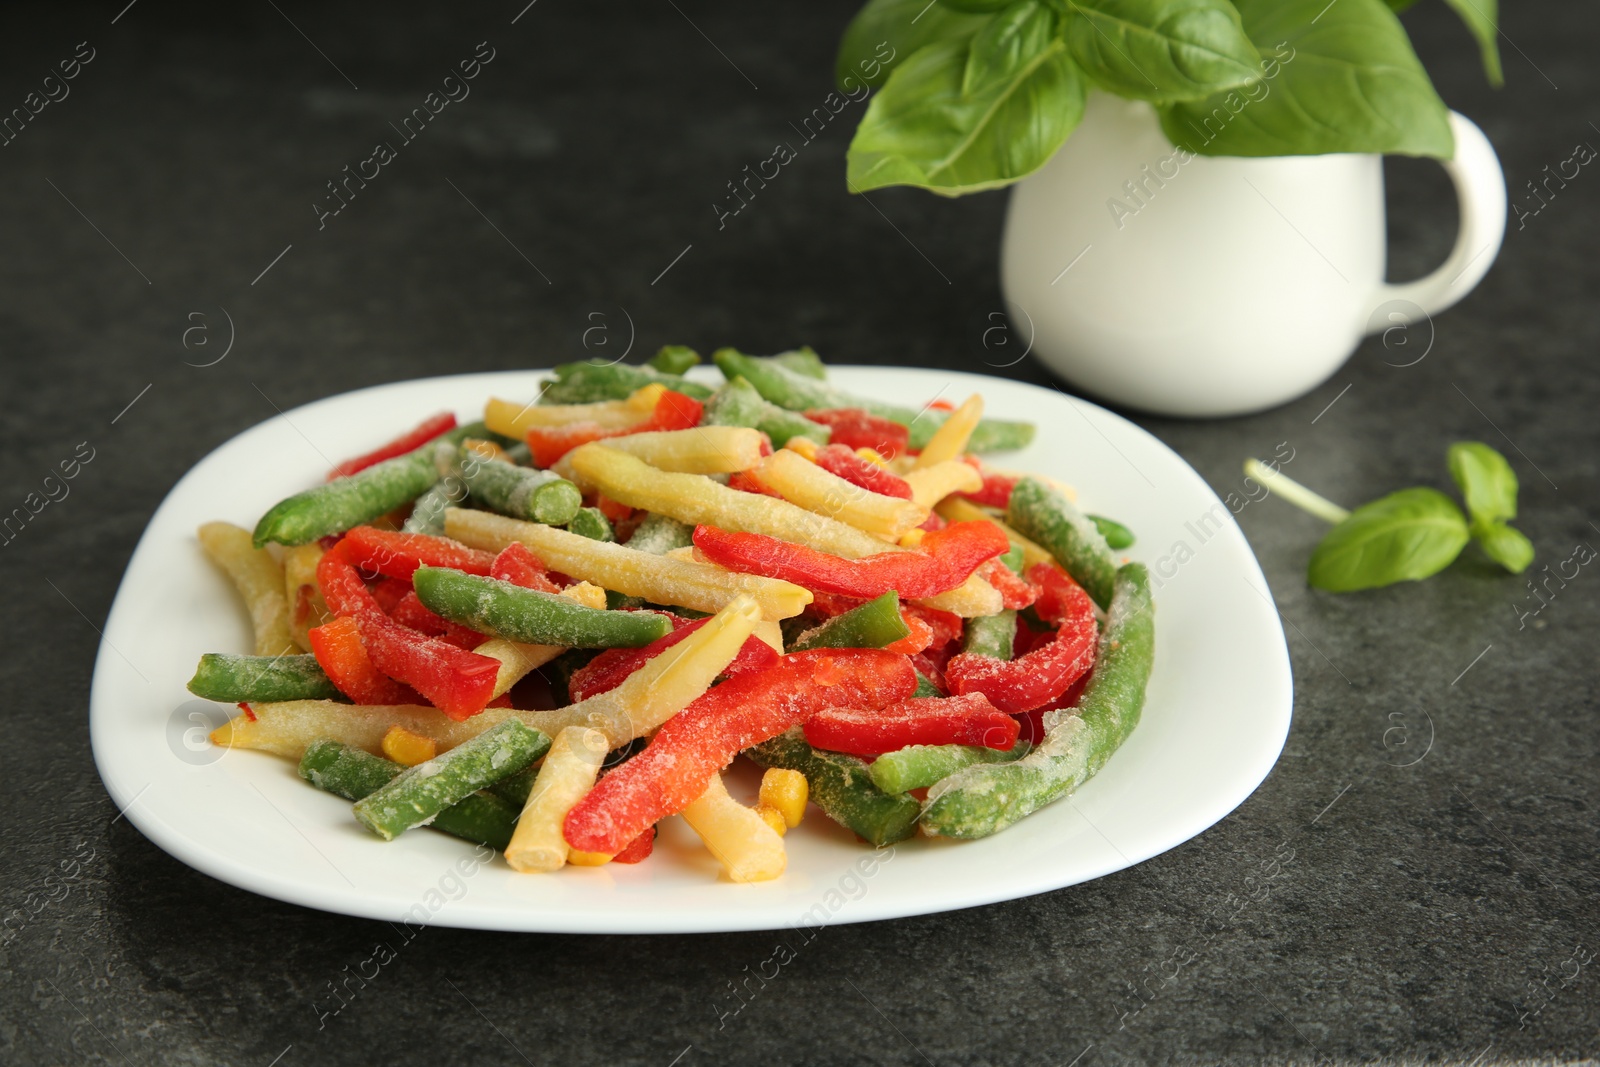 Photo of Mix of different frozen vegetables on gray table, closeup